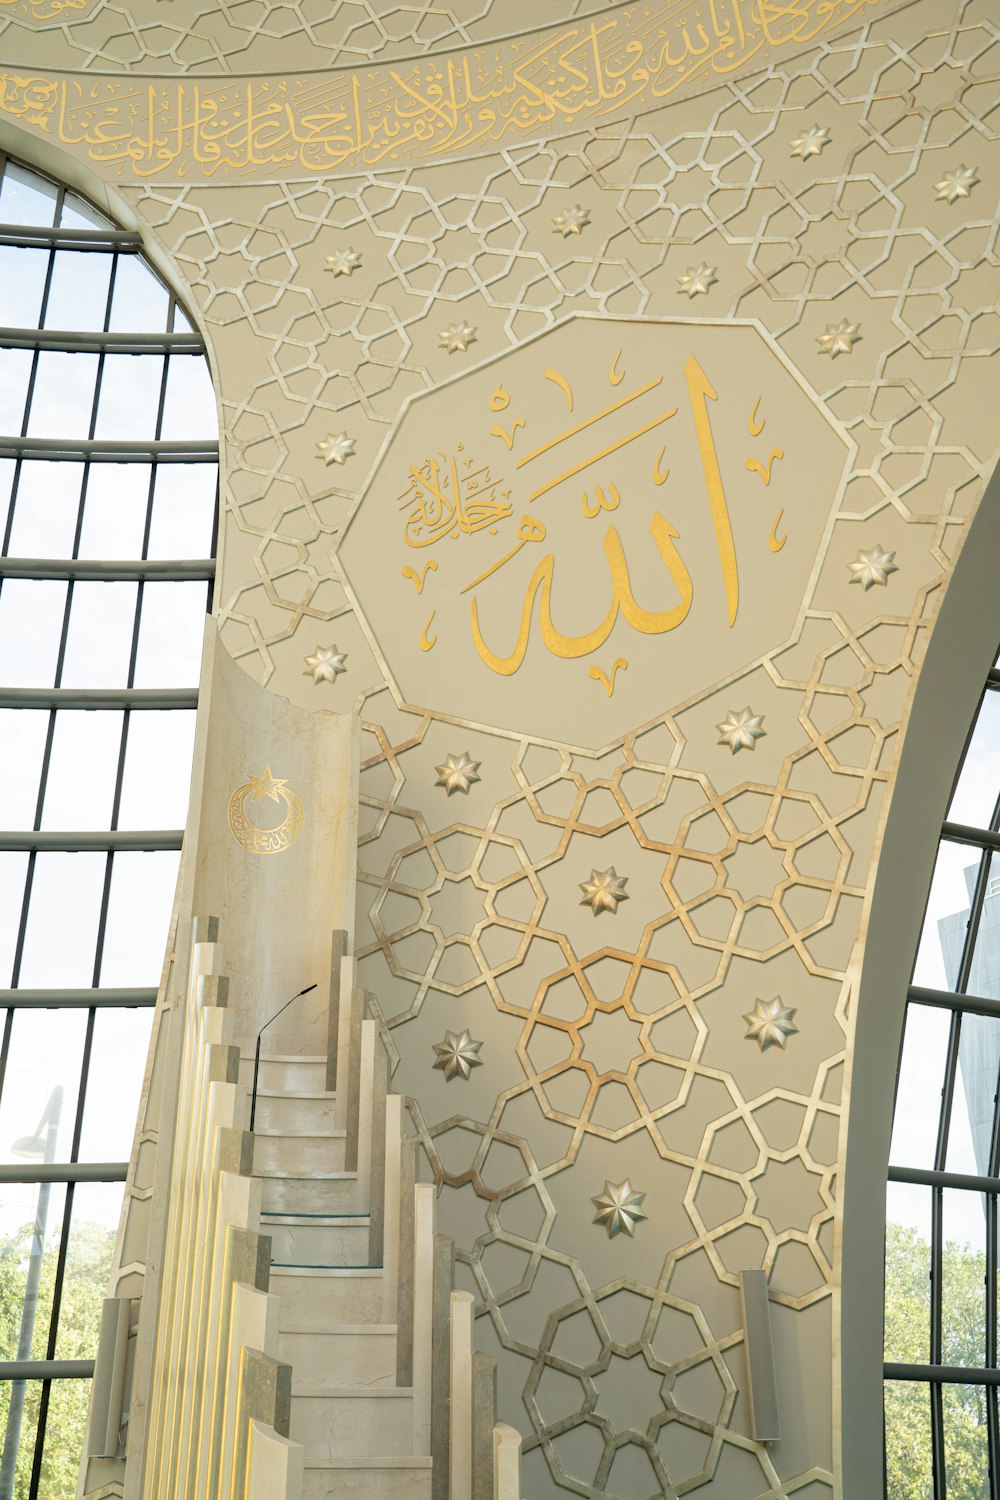 a staircase in a building with arabic writing on the wall